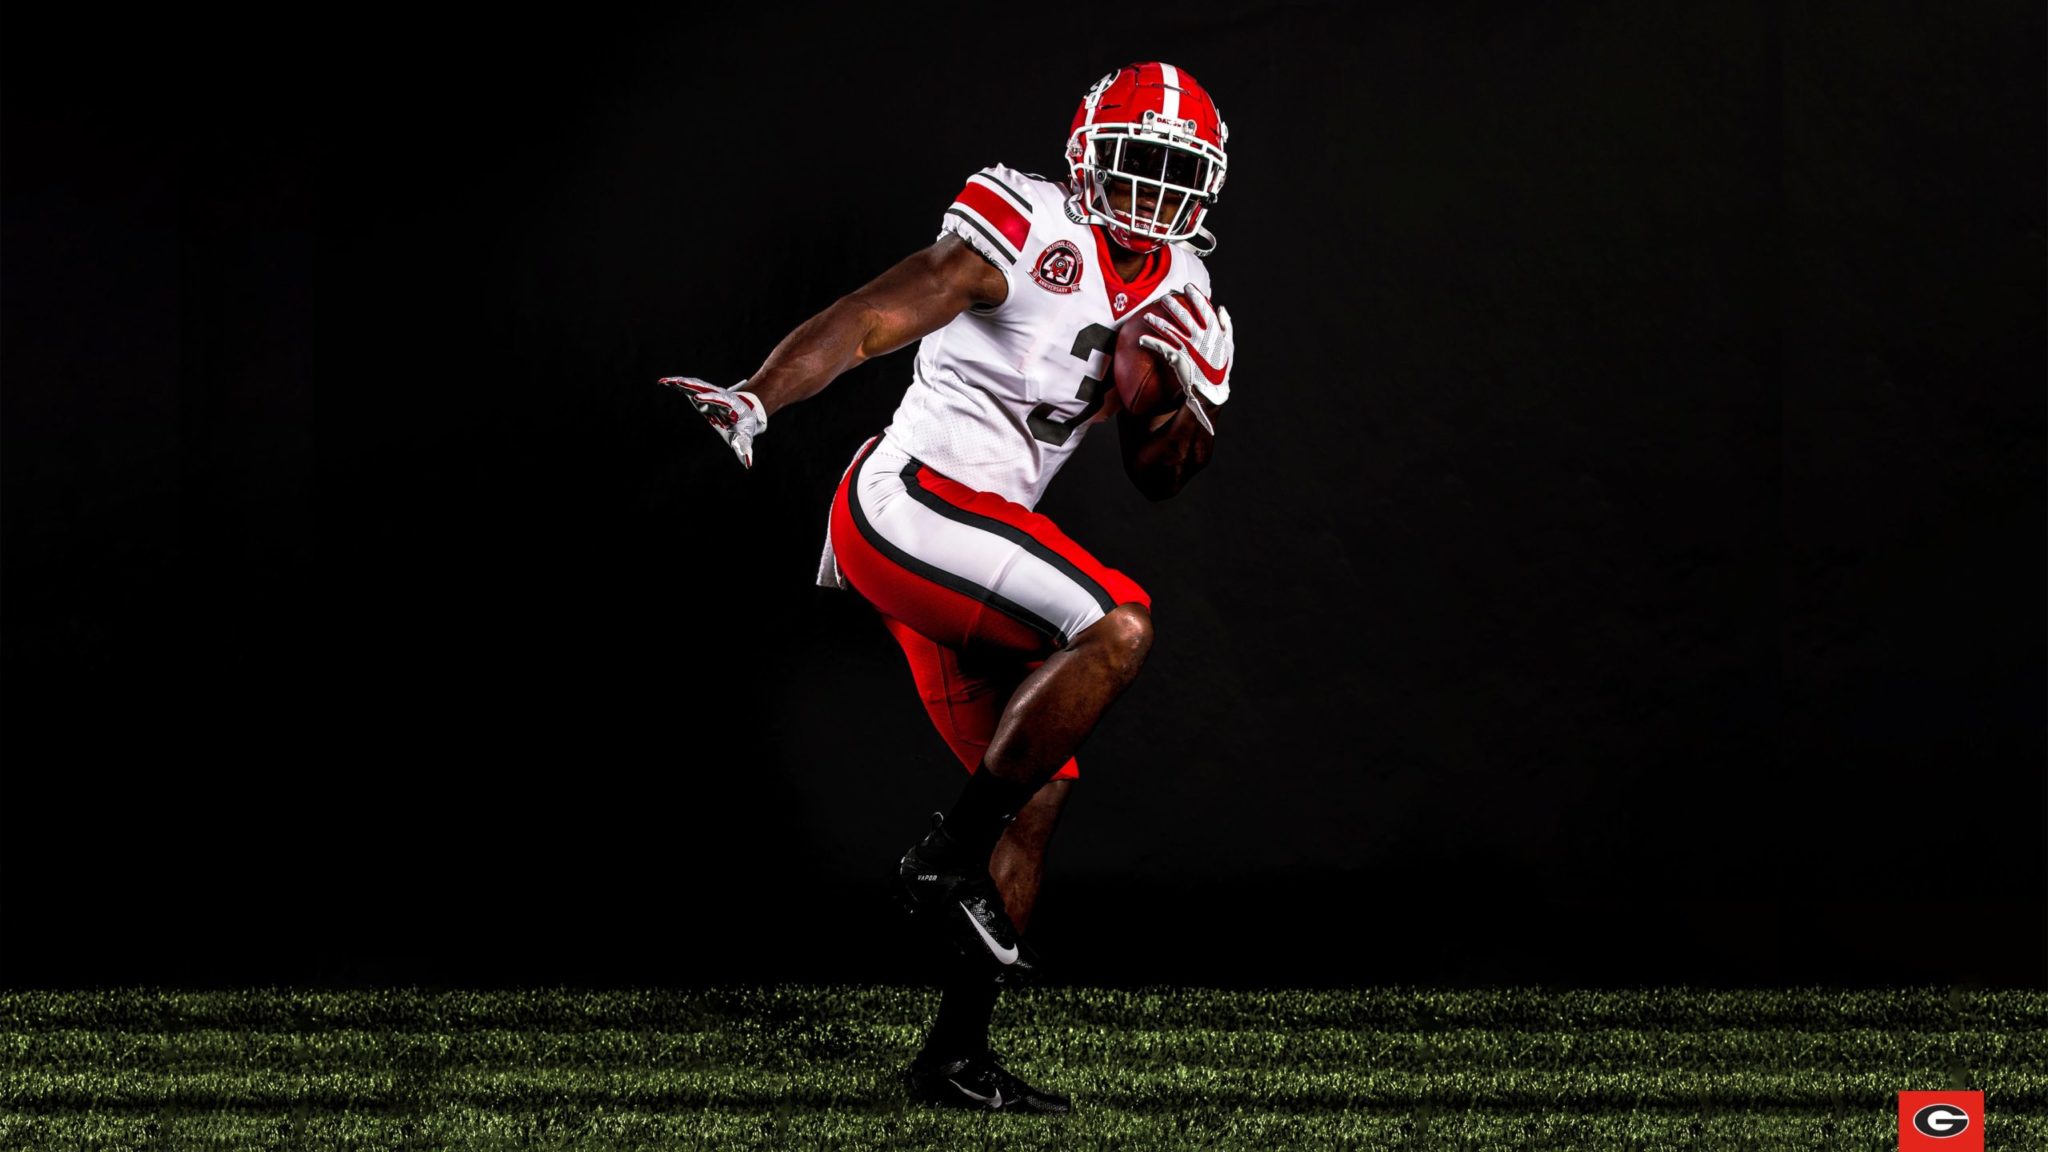 New Georgia football uniforms and logo only slightly different 